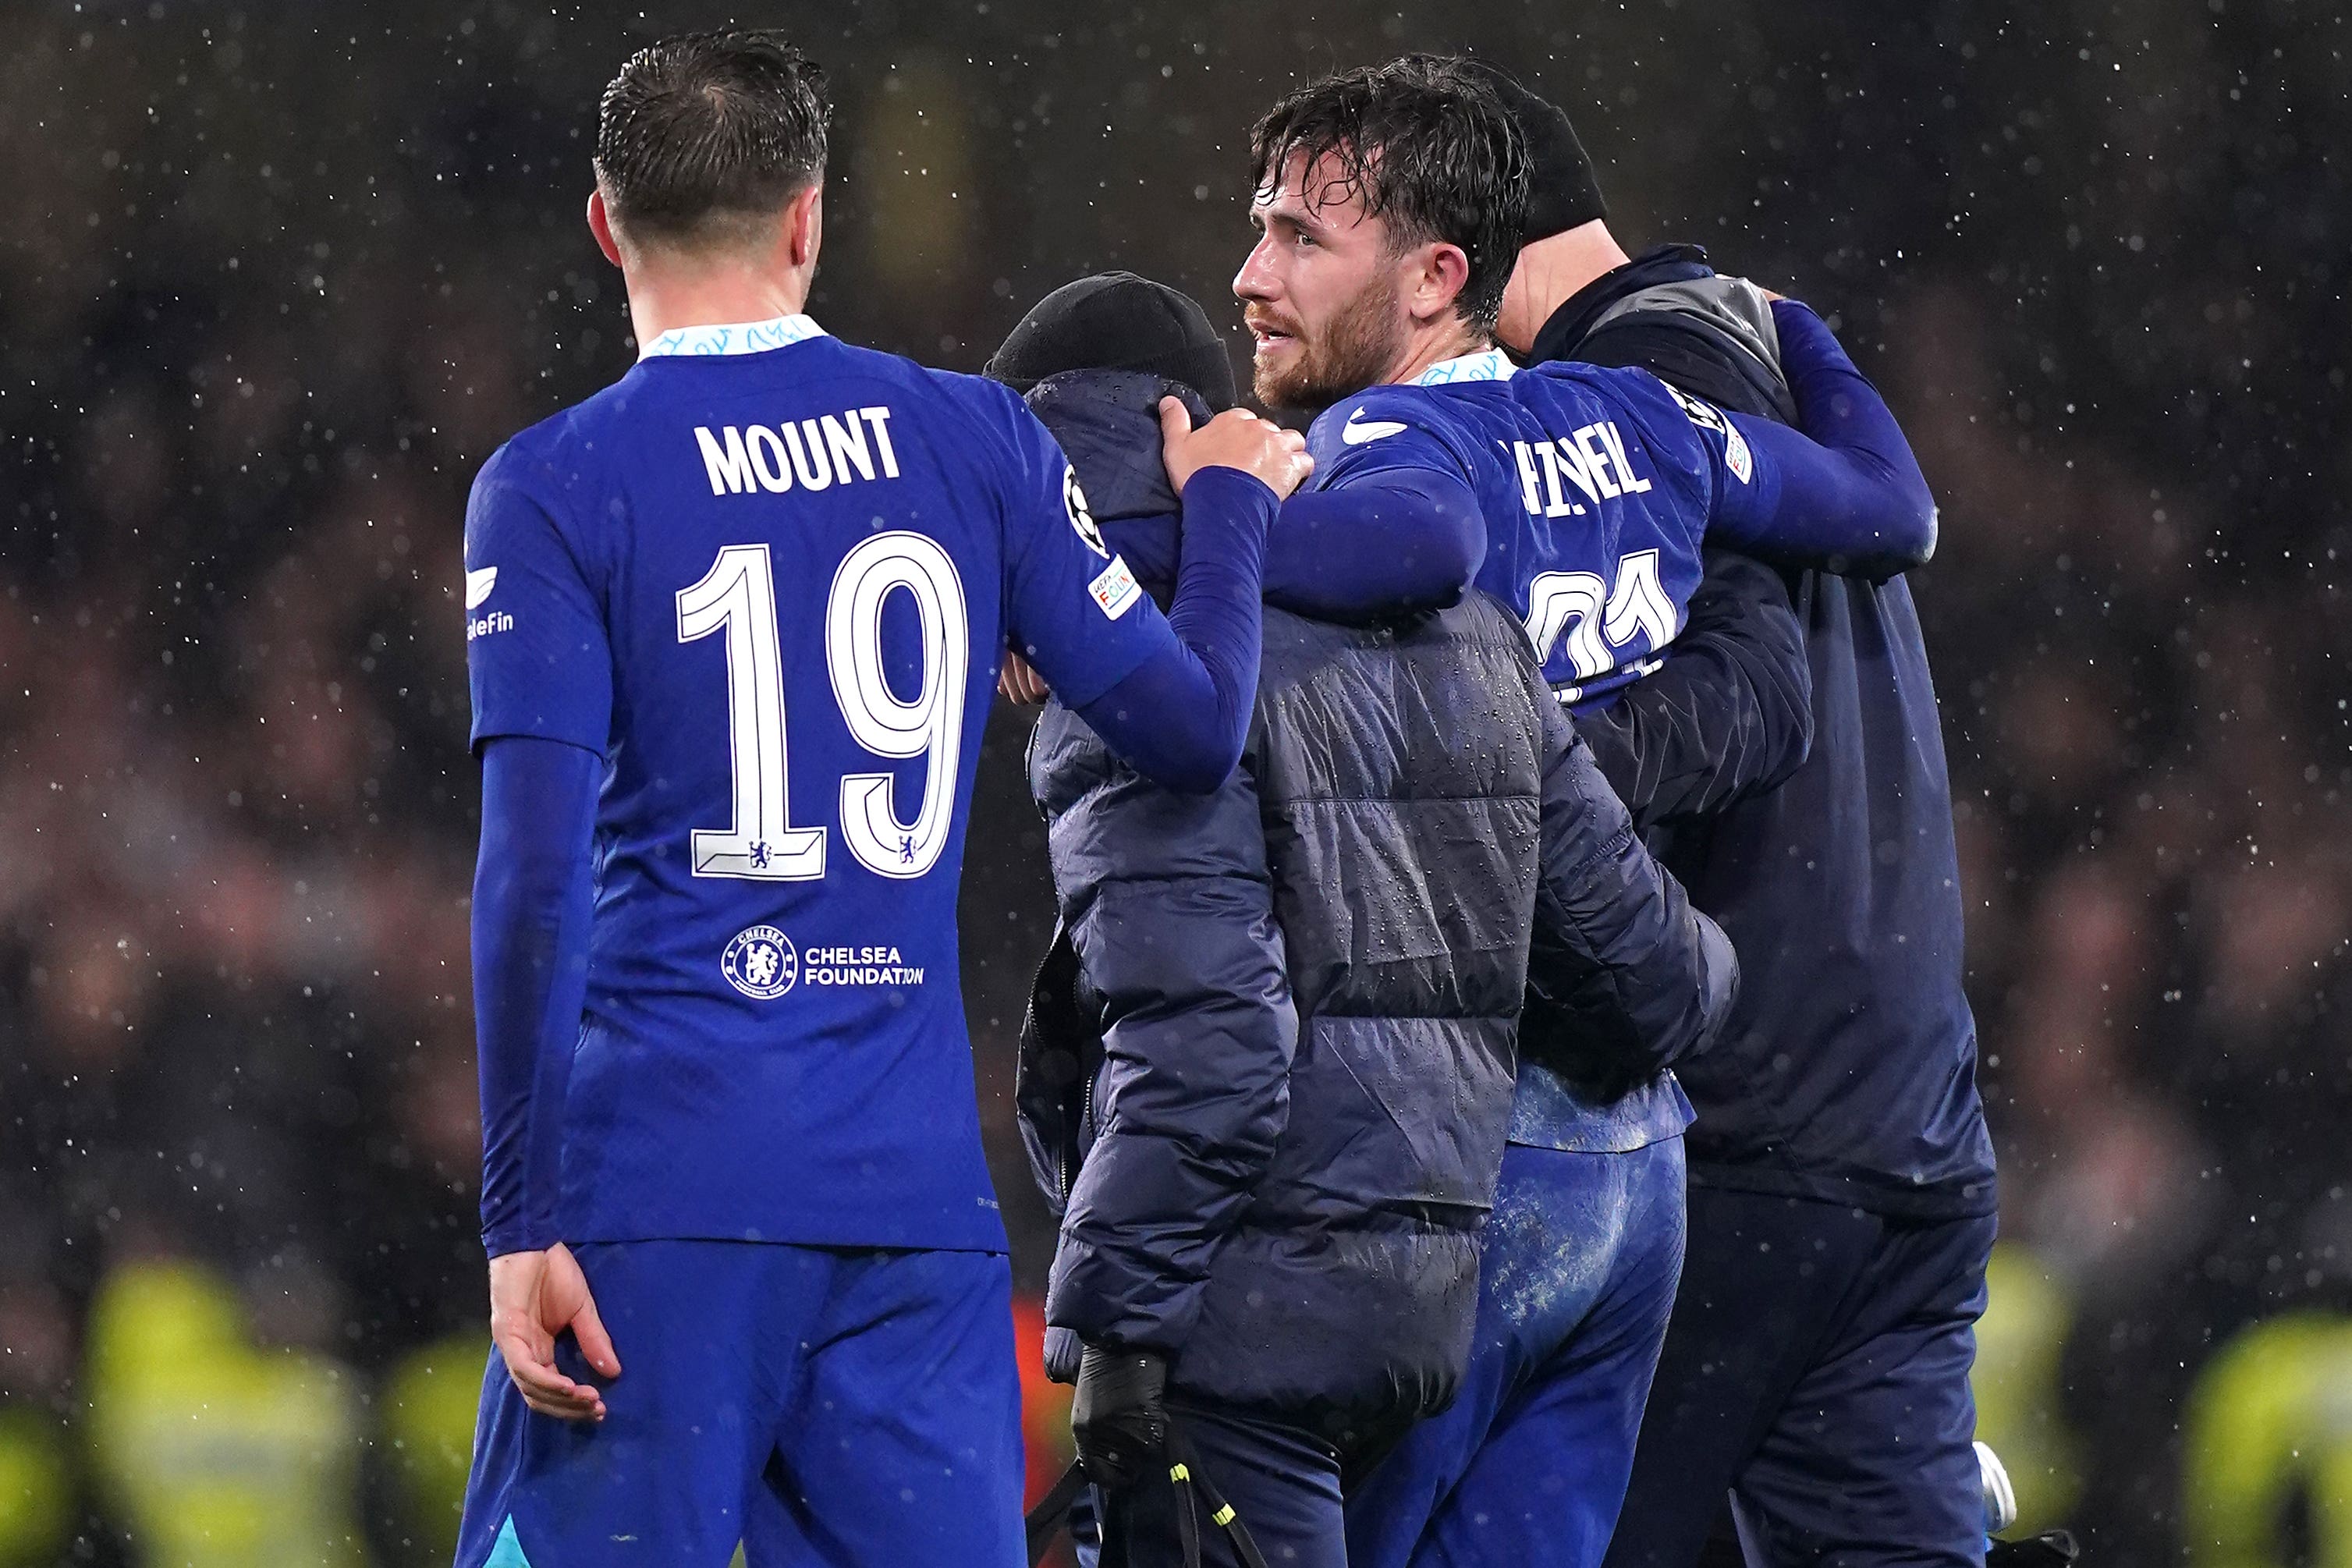 Chilwell will miss the tournament with a hamstring injury